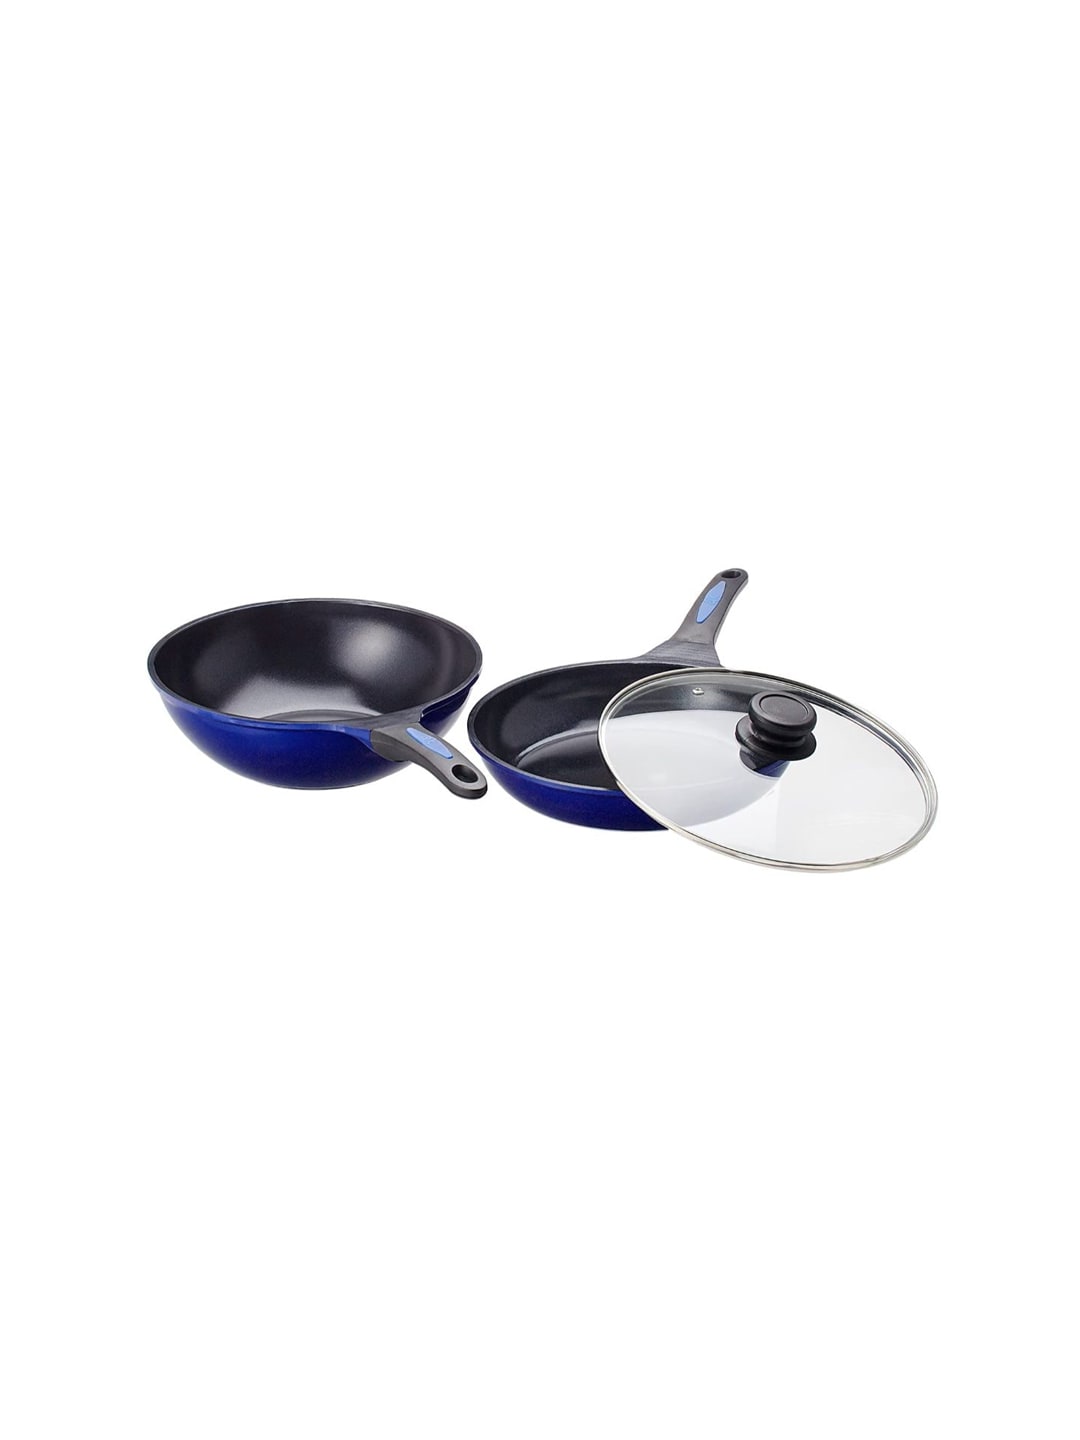 Wonderchef Blue & Black Pack Of 2 Solid Cookware Set Price in India